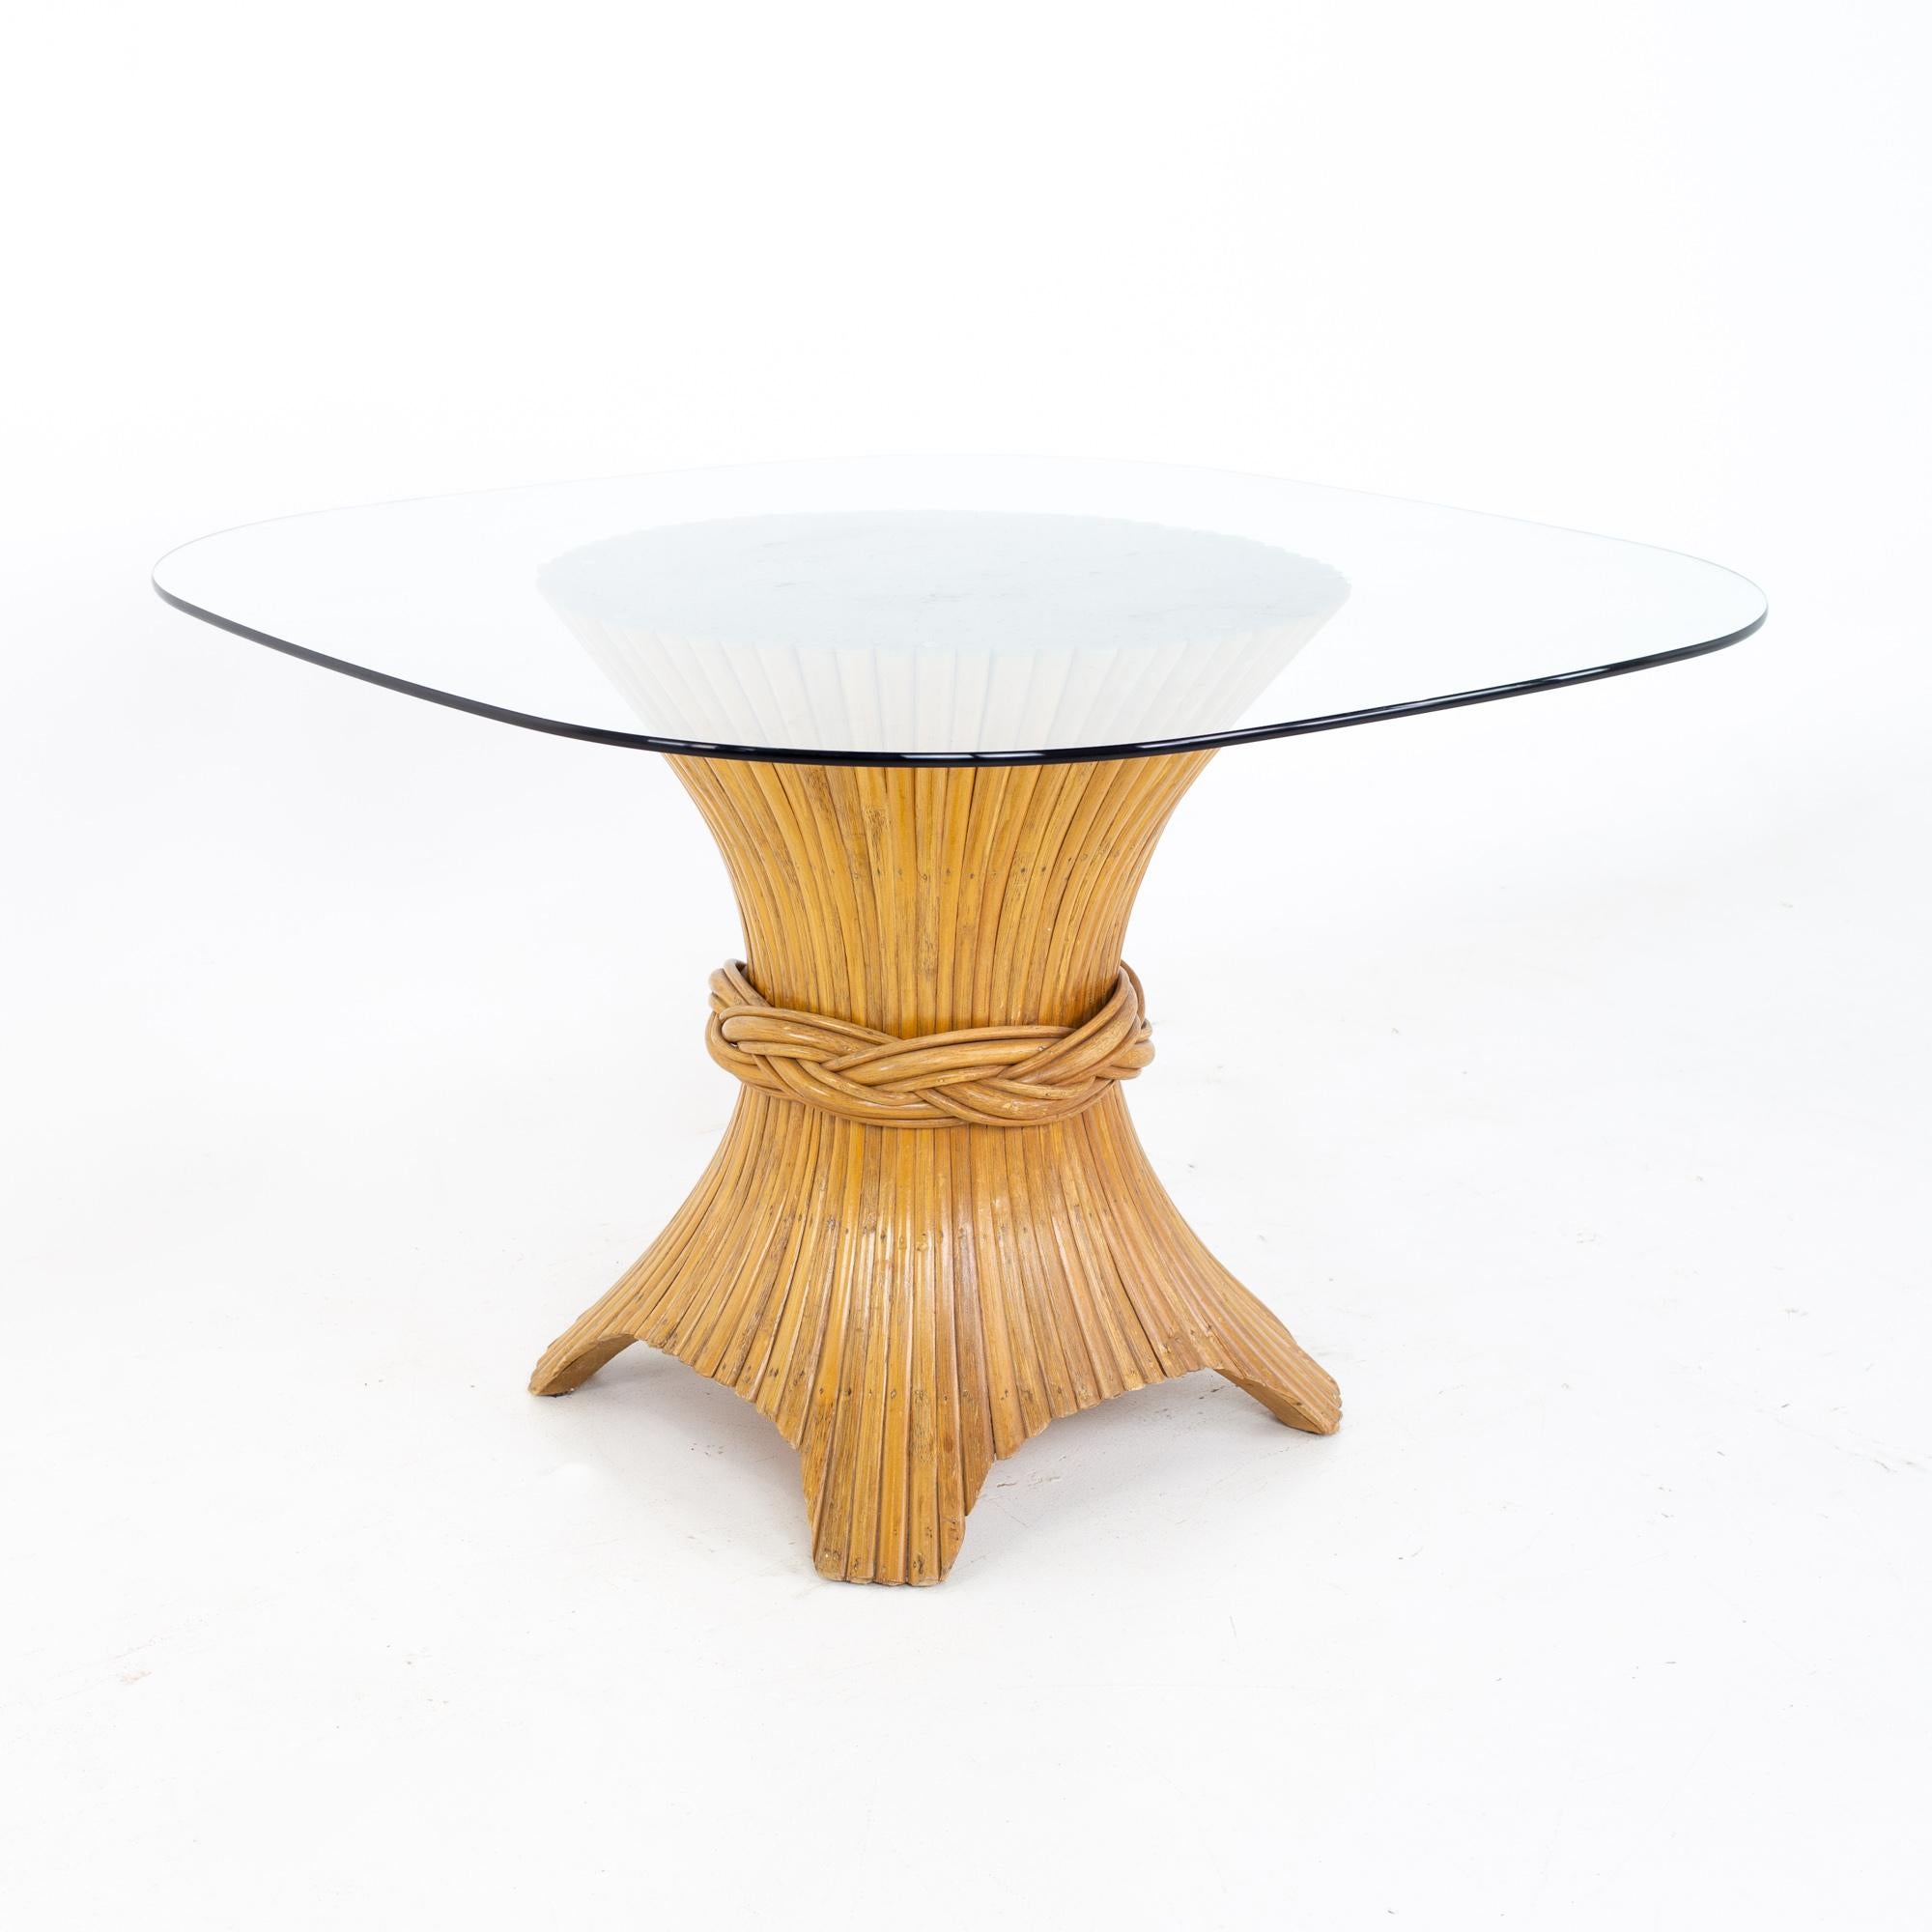 McGuire mid century bamboo sheath glass dining table
Table measure: 45 wide x 45 deep x 28.5 inches high

All pieces of furniture can be had in what we call restored vintage condition. That means the piece is restored upon purchase so it’s free